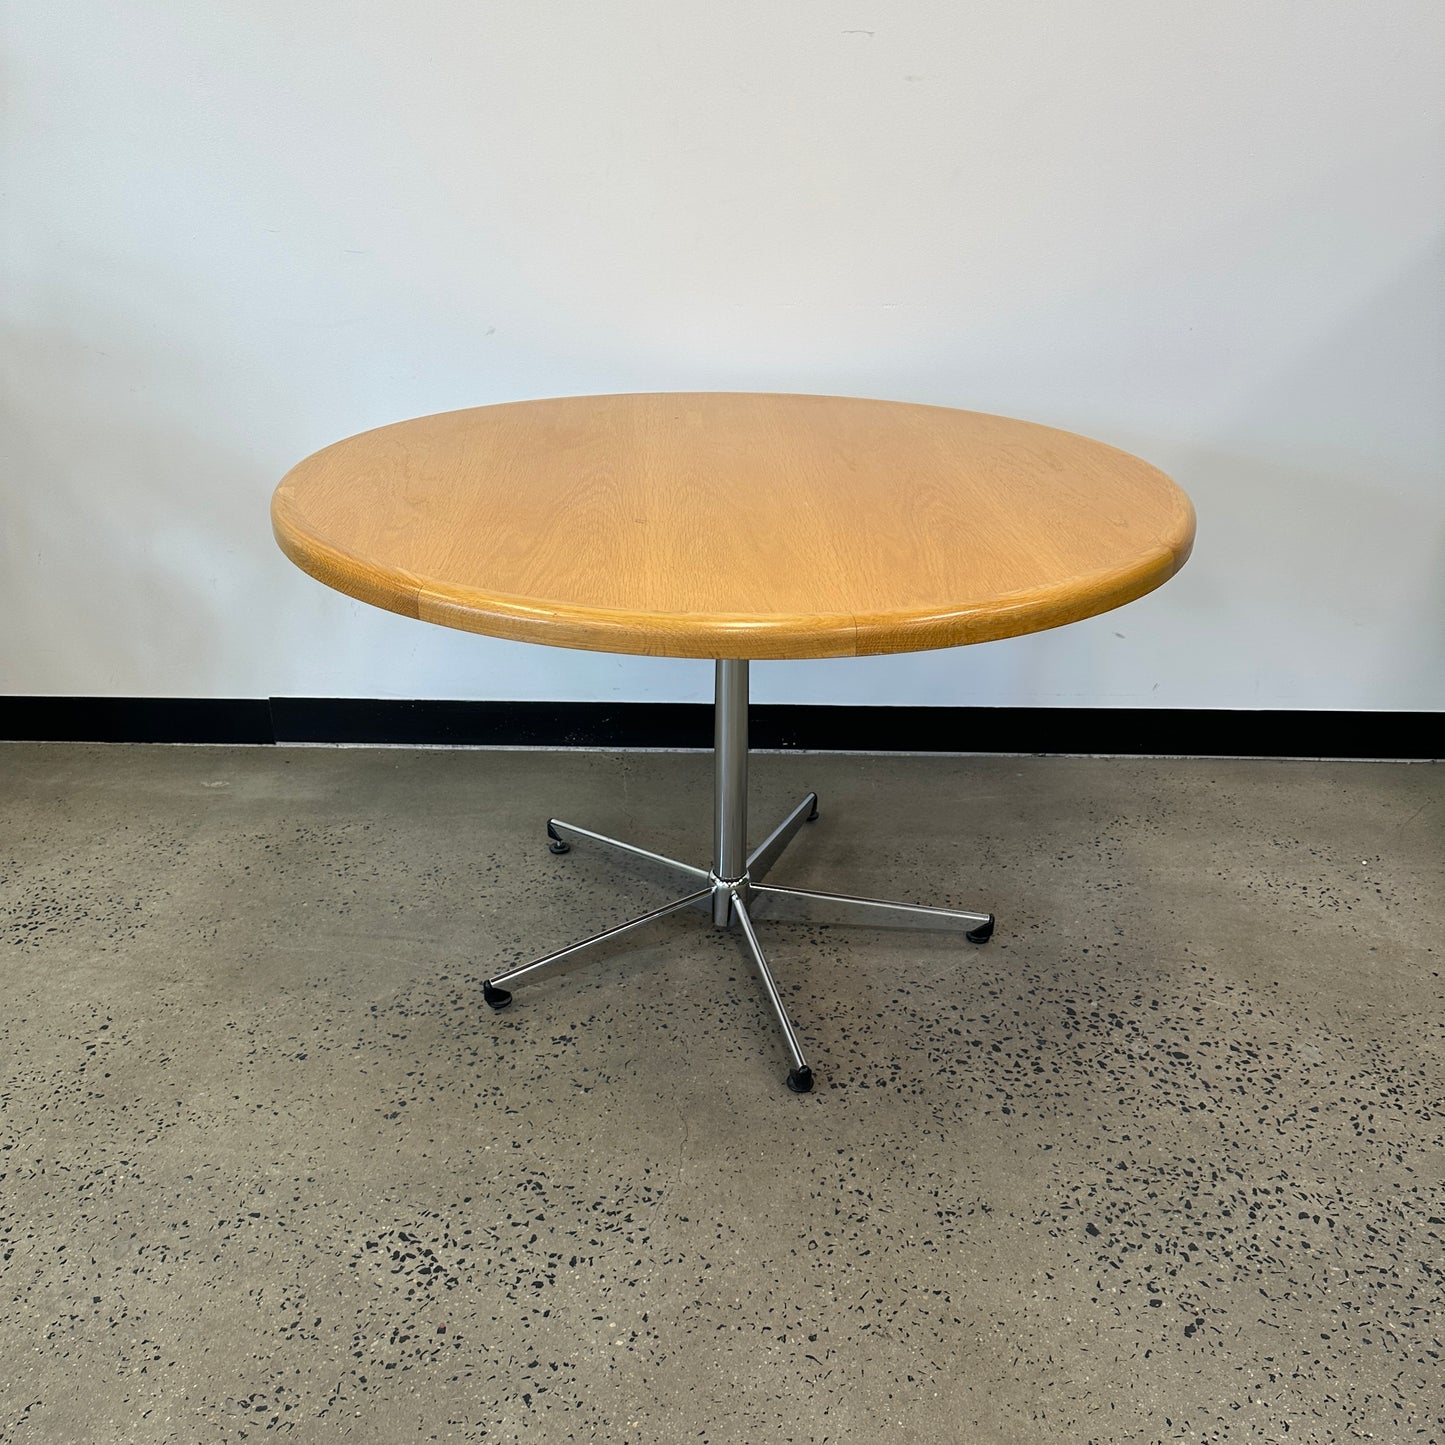 Round Meeting Table Wooden with Chrome Base